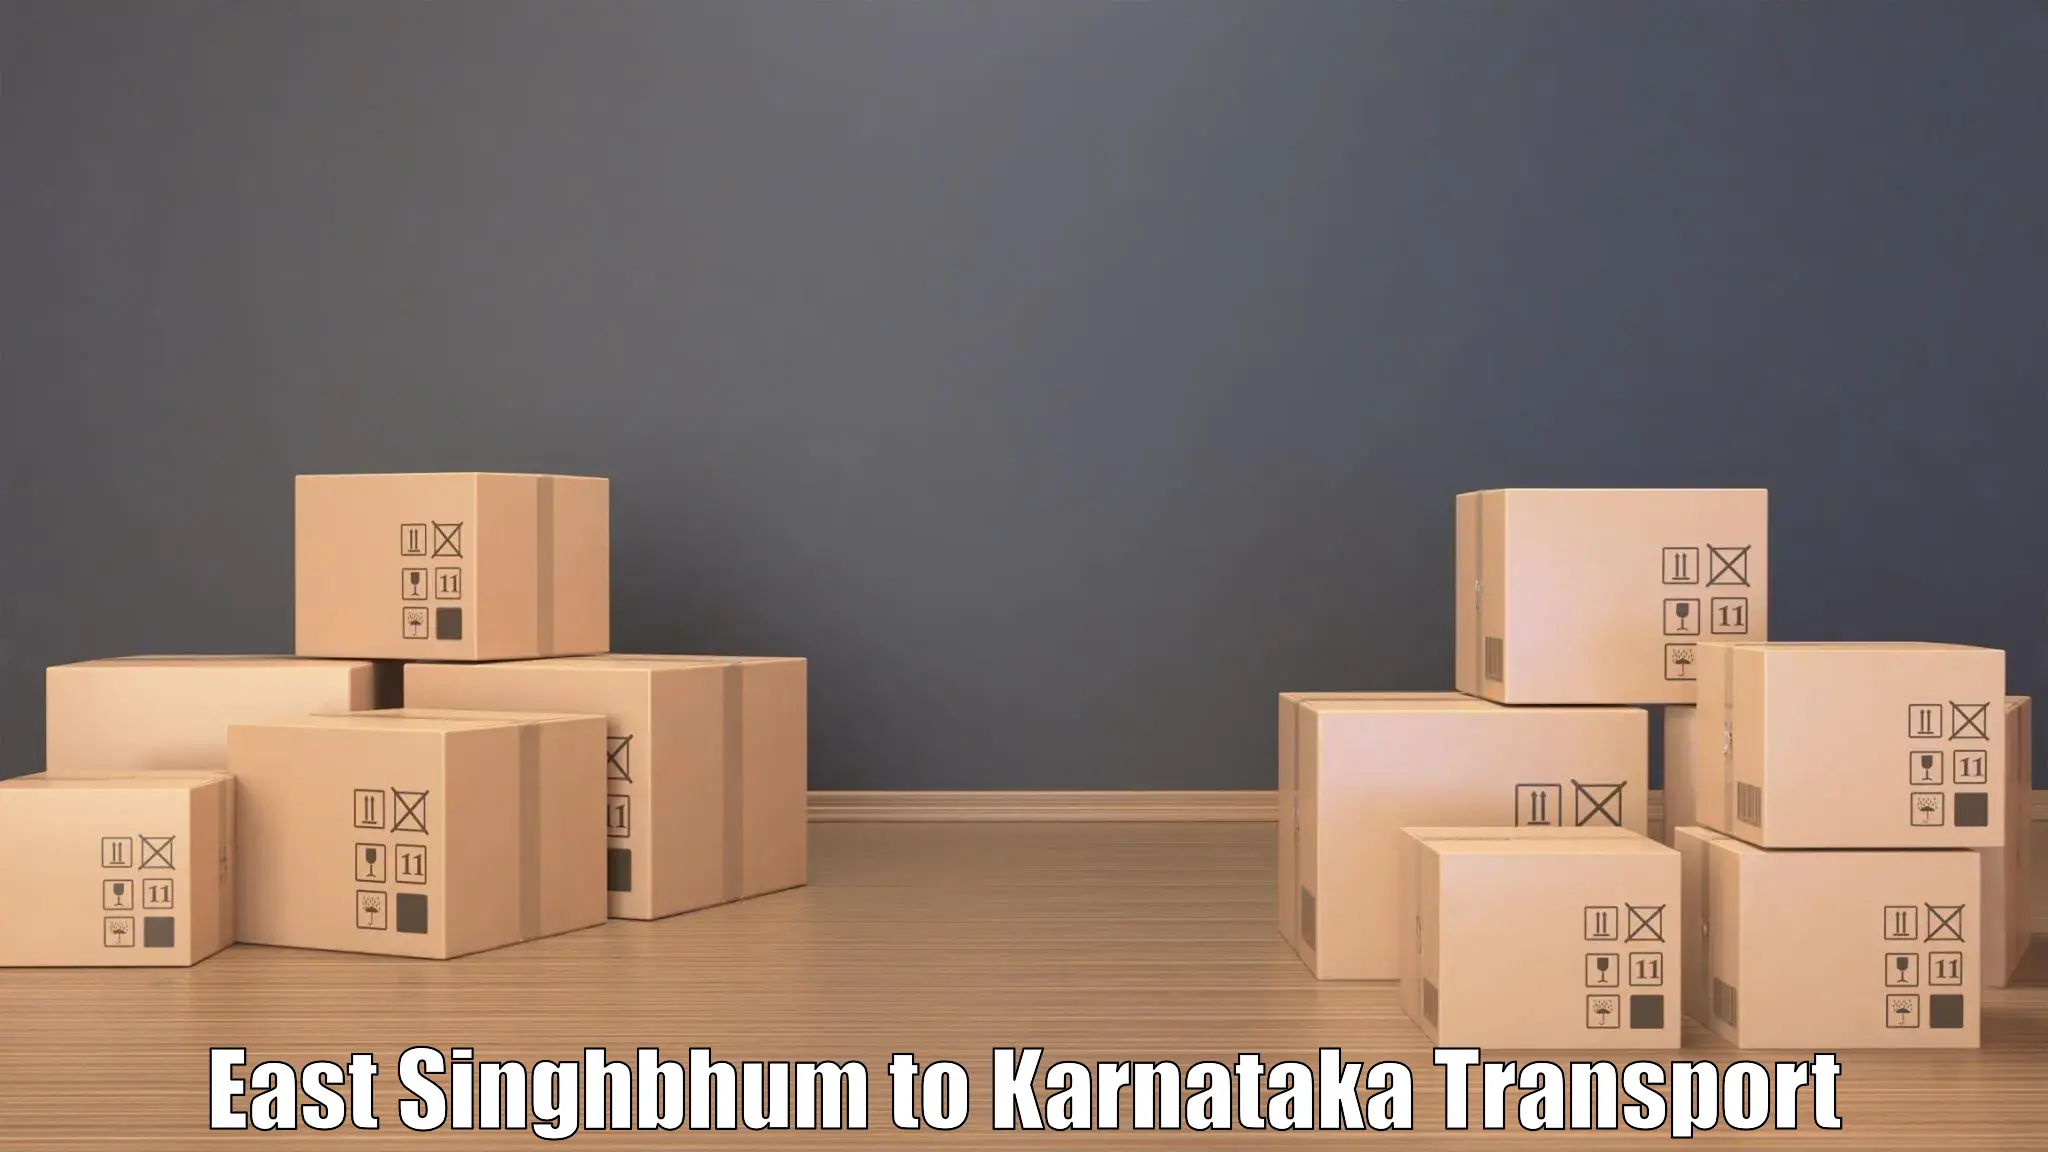 Package delivery services East Singhbhum to Chintamani Kolar